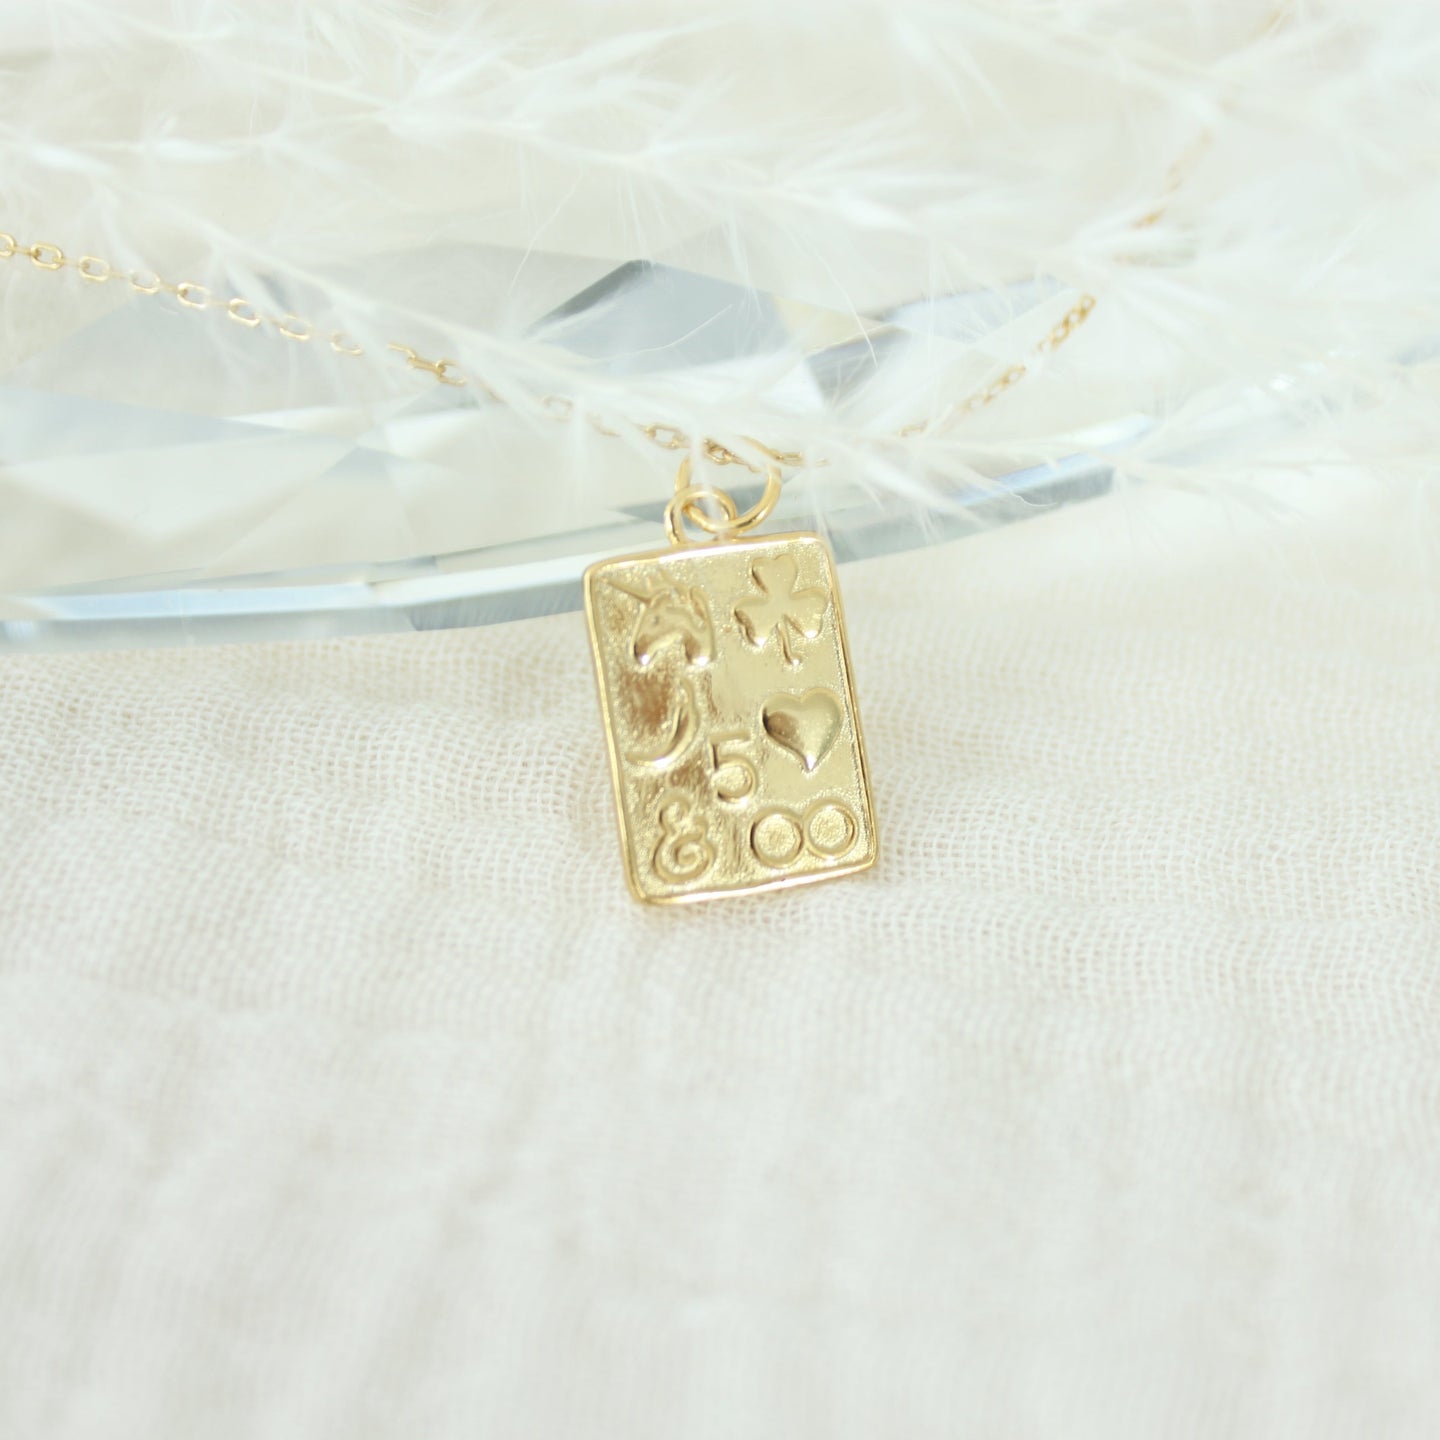 Lucky 18K Gold Vermeil Good Fortune Pendant Necklace - Elisa Maree Jewelry